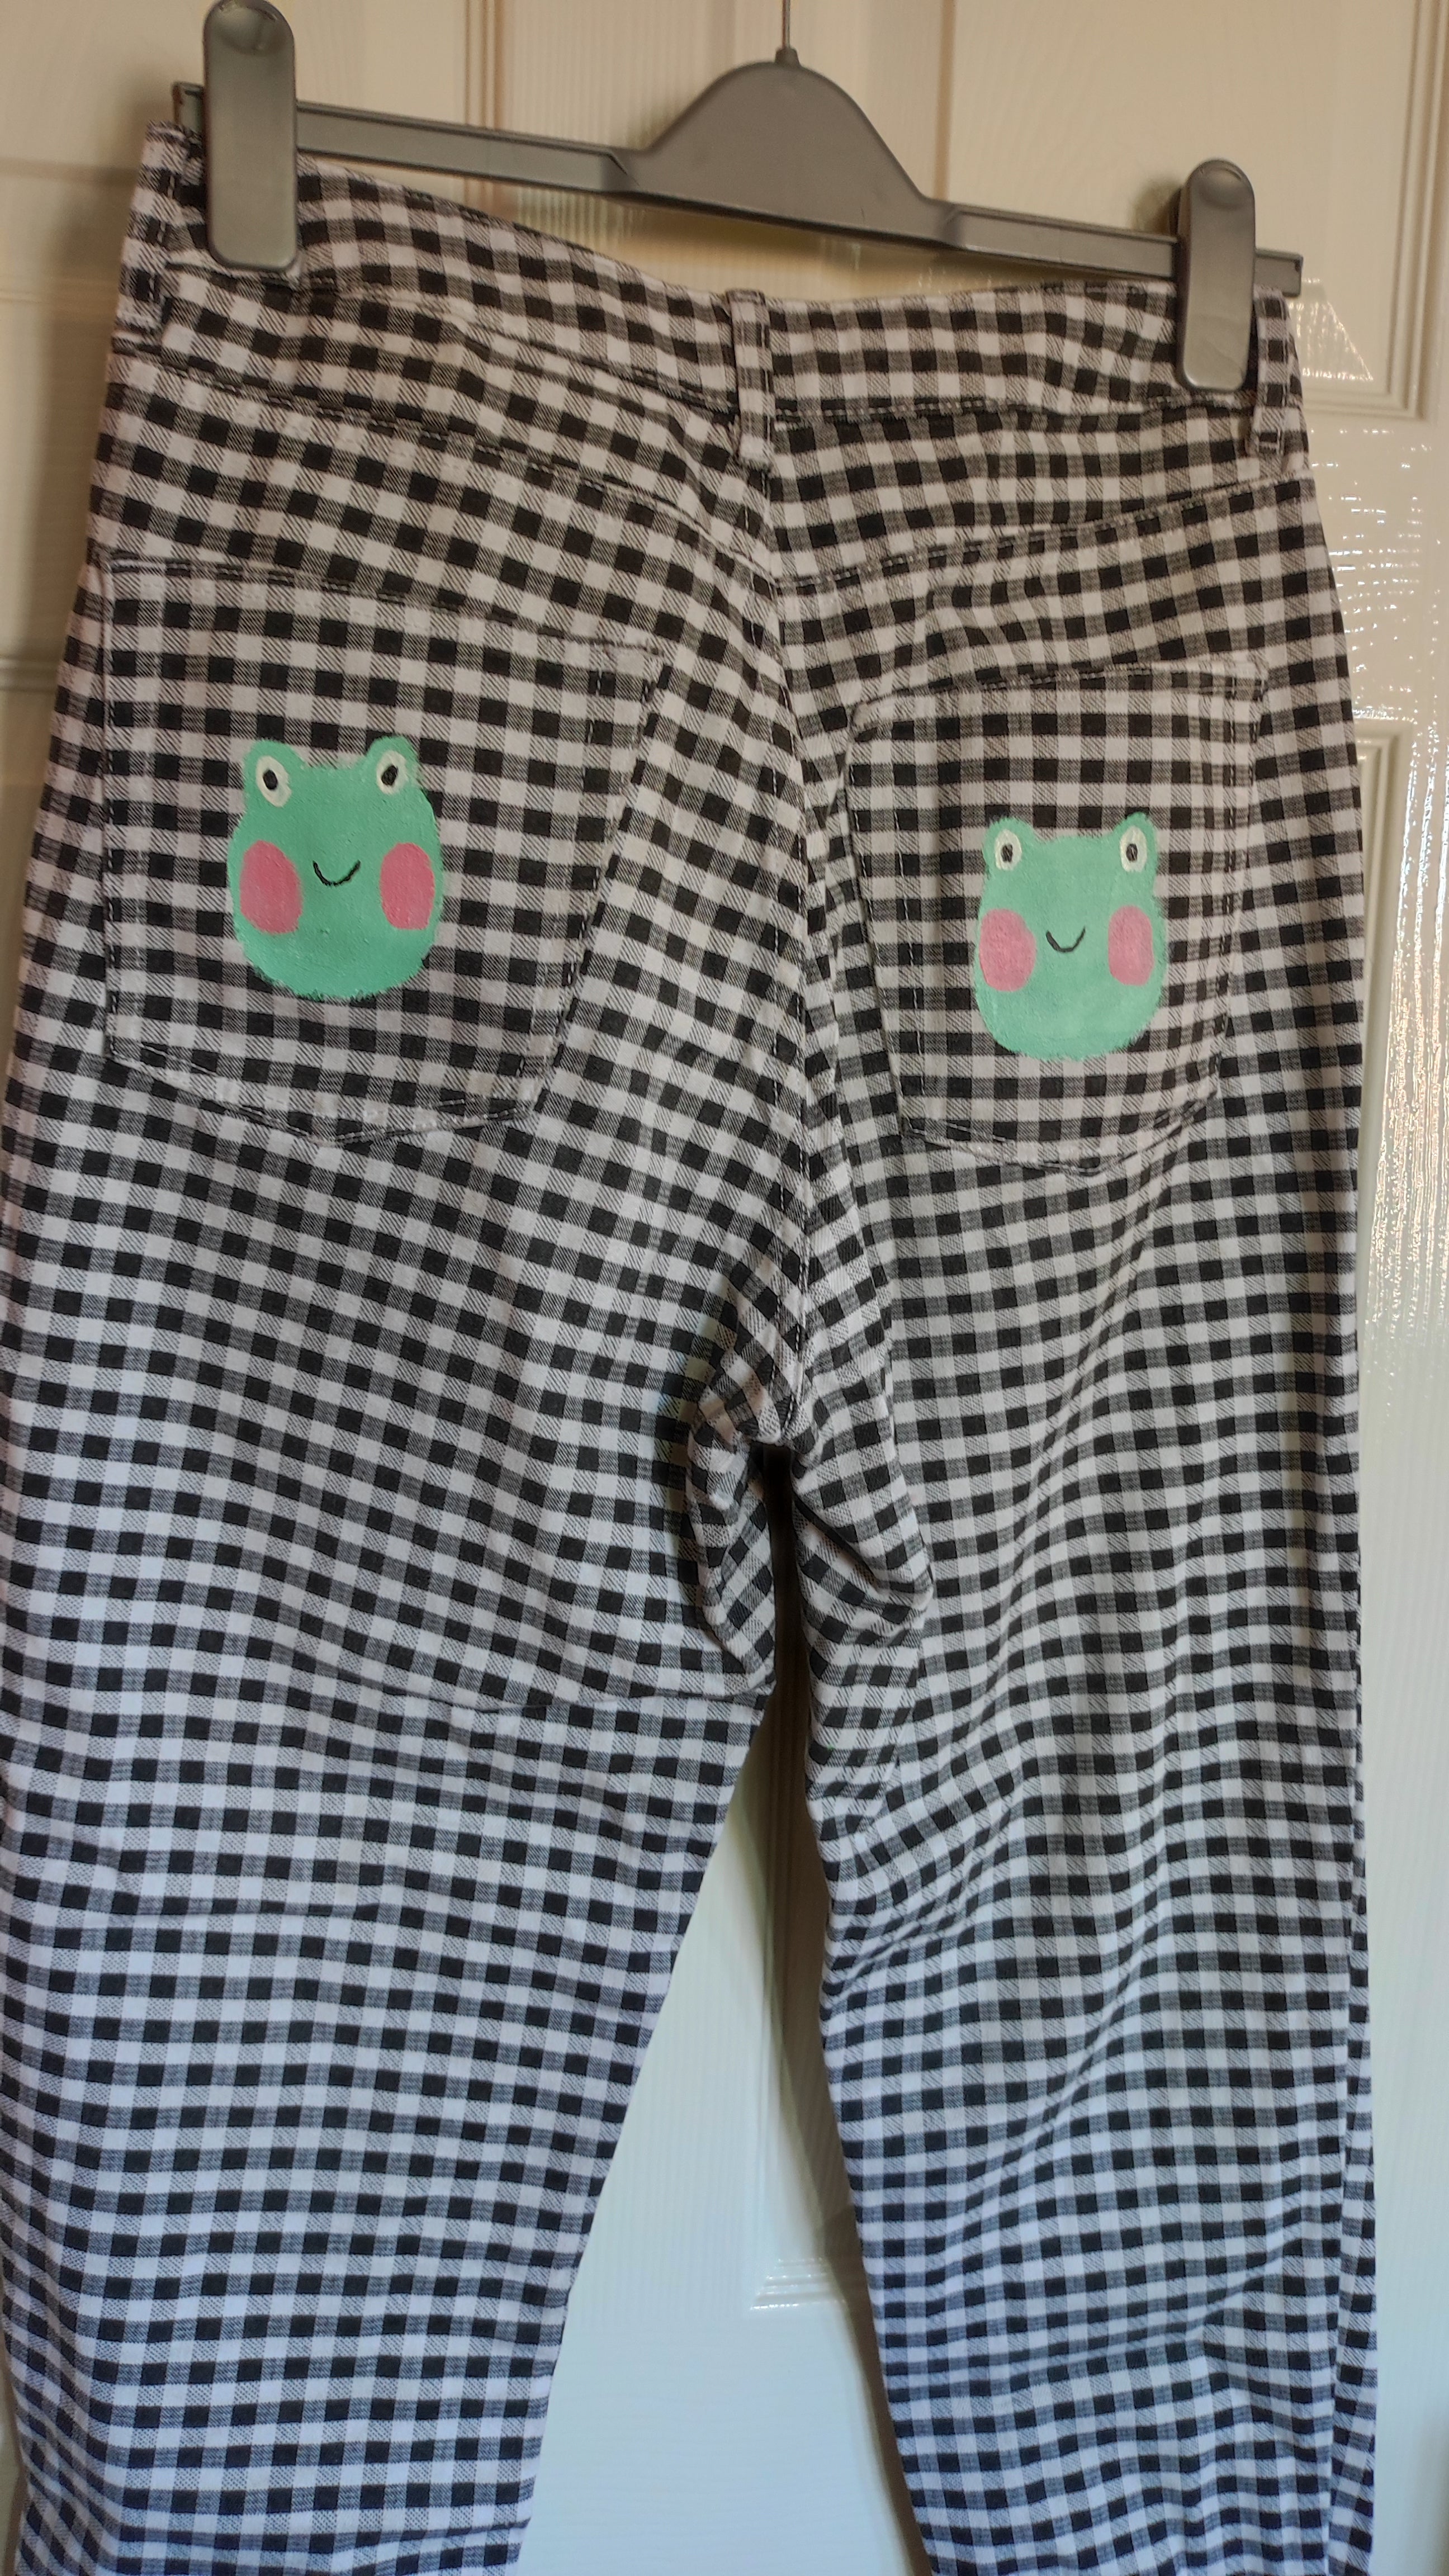 gingham mom jeans with froggies W30